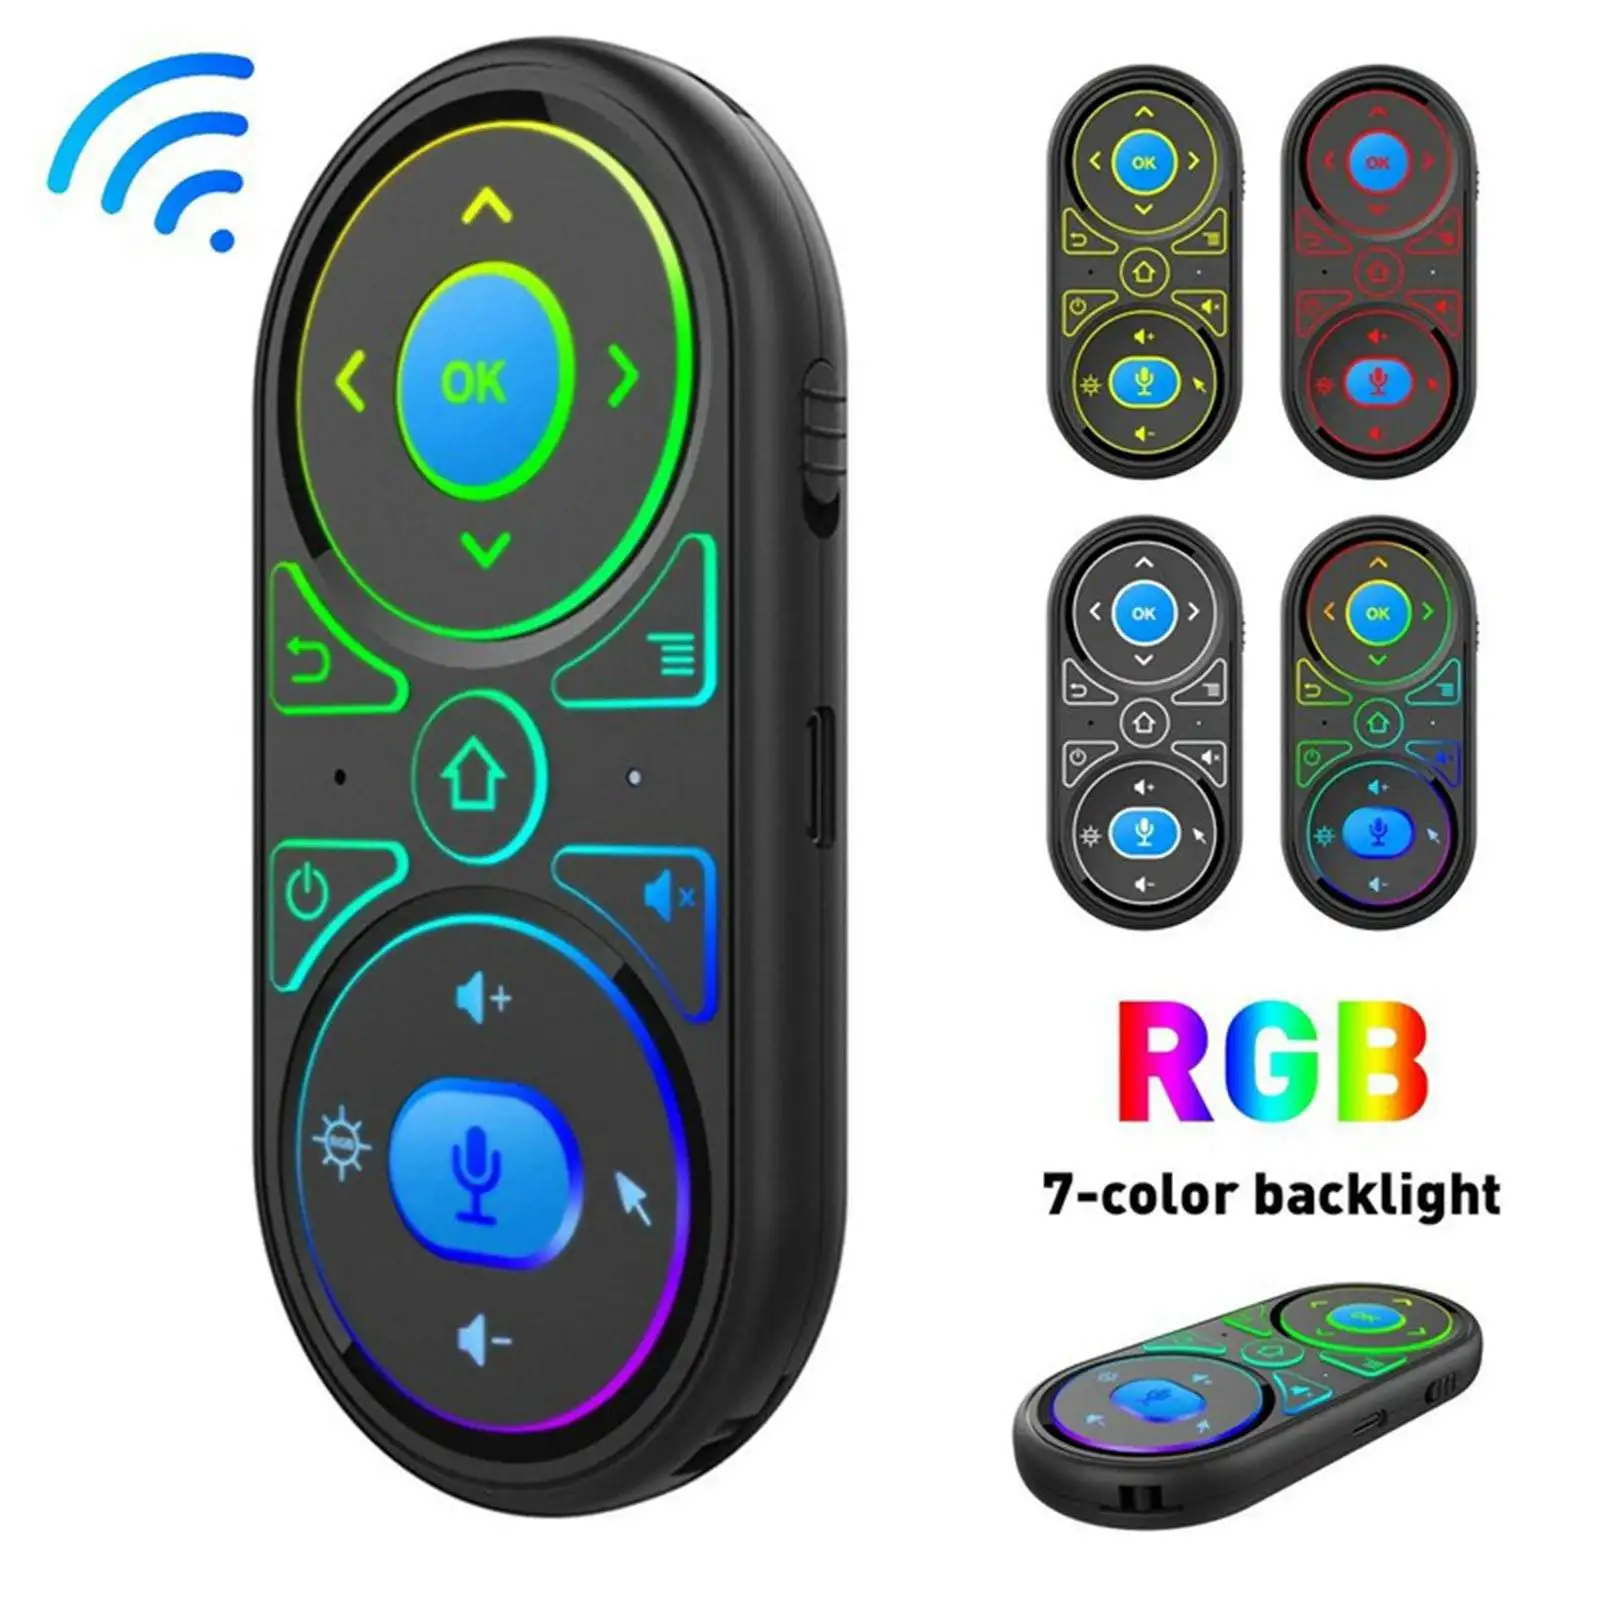 G11 Voice Remote Control Universal with Backlit 2.4G Wireless USB Receiver Smart Mouse for Media Player Learning Htpc Projector